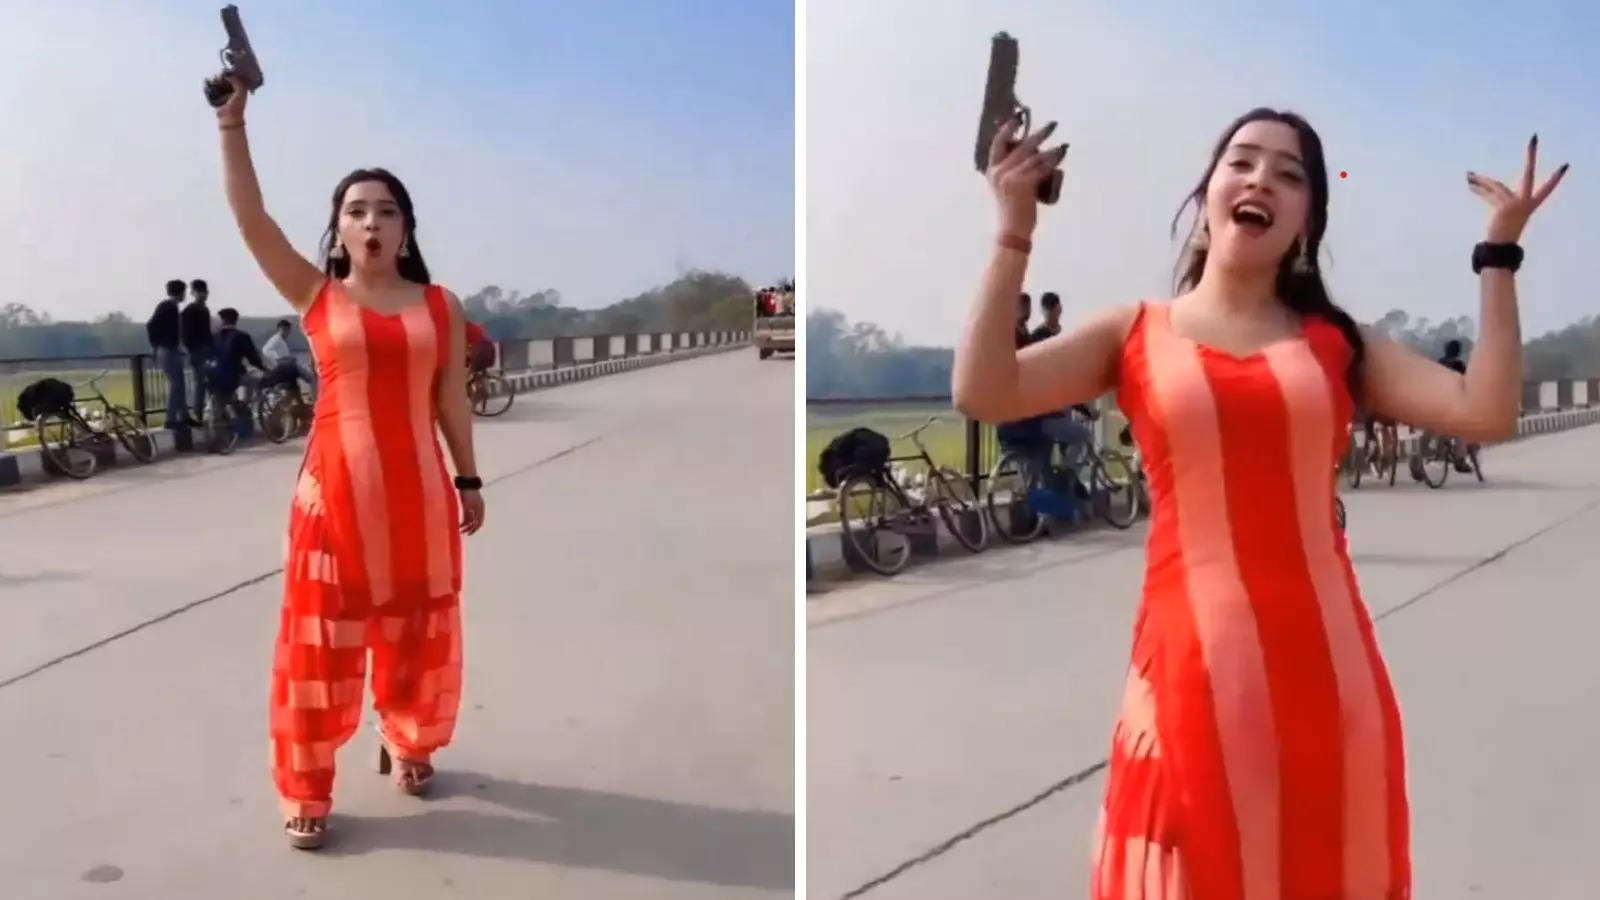 Woman Youtuber films video with gun in hand. Uttar Pradesh Police reacts 